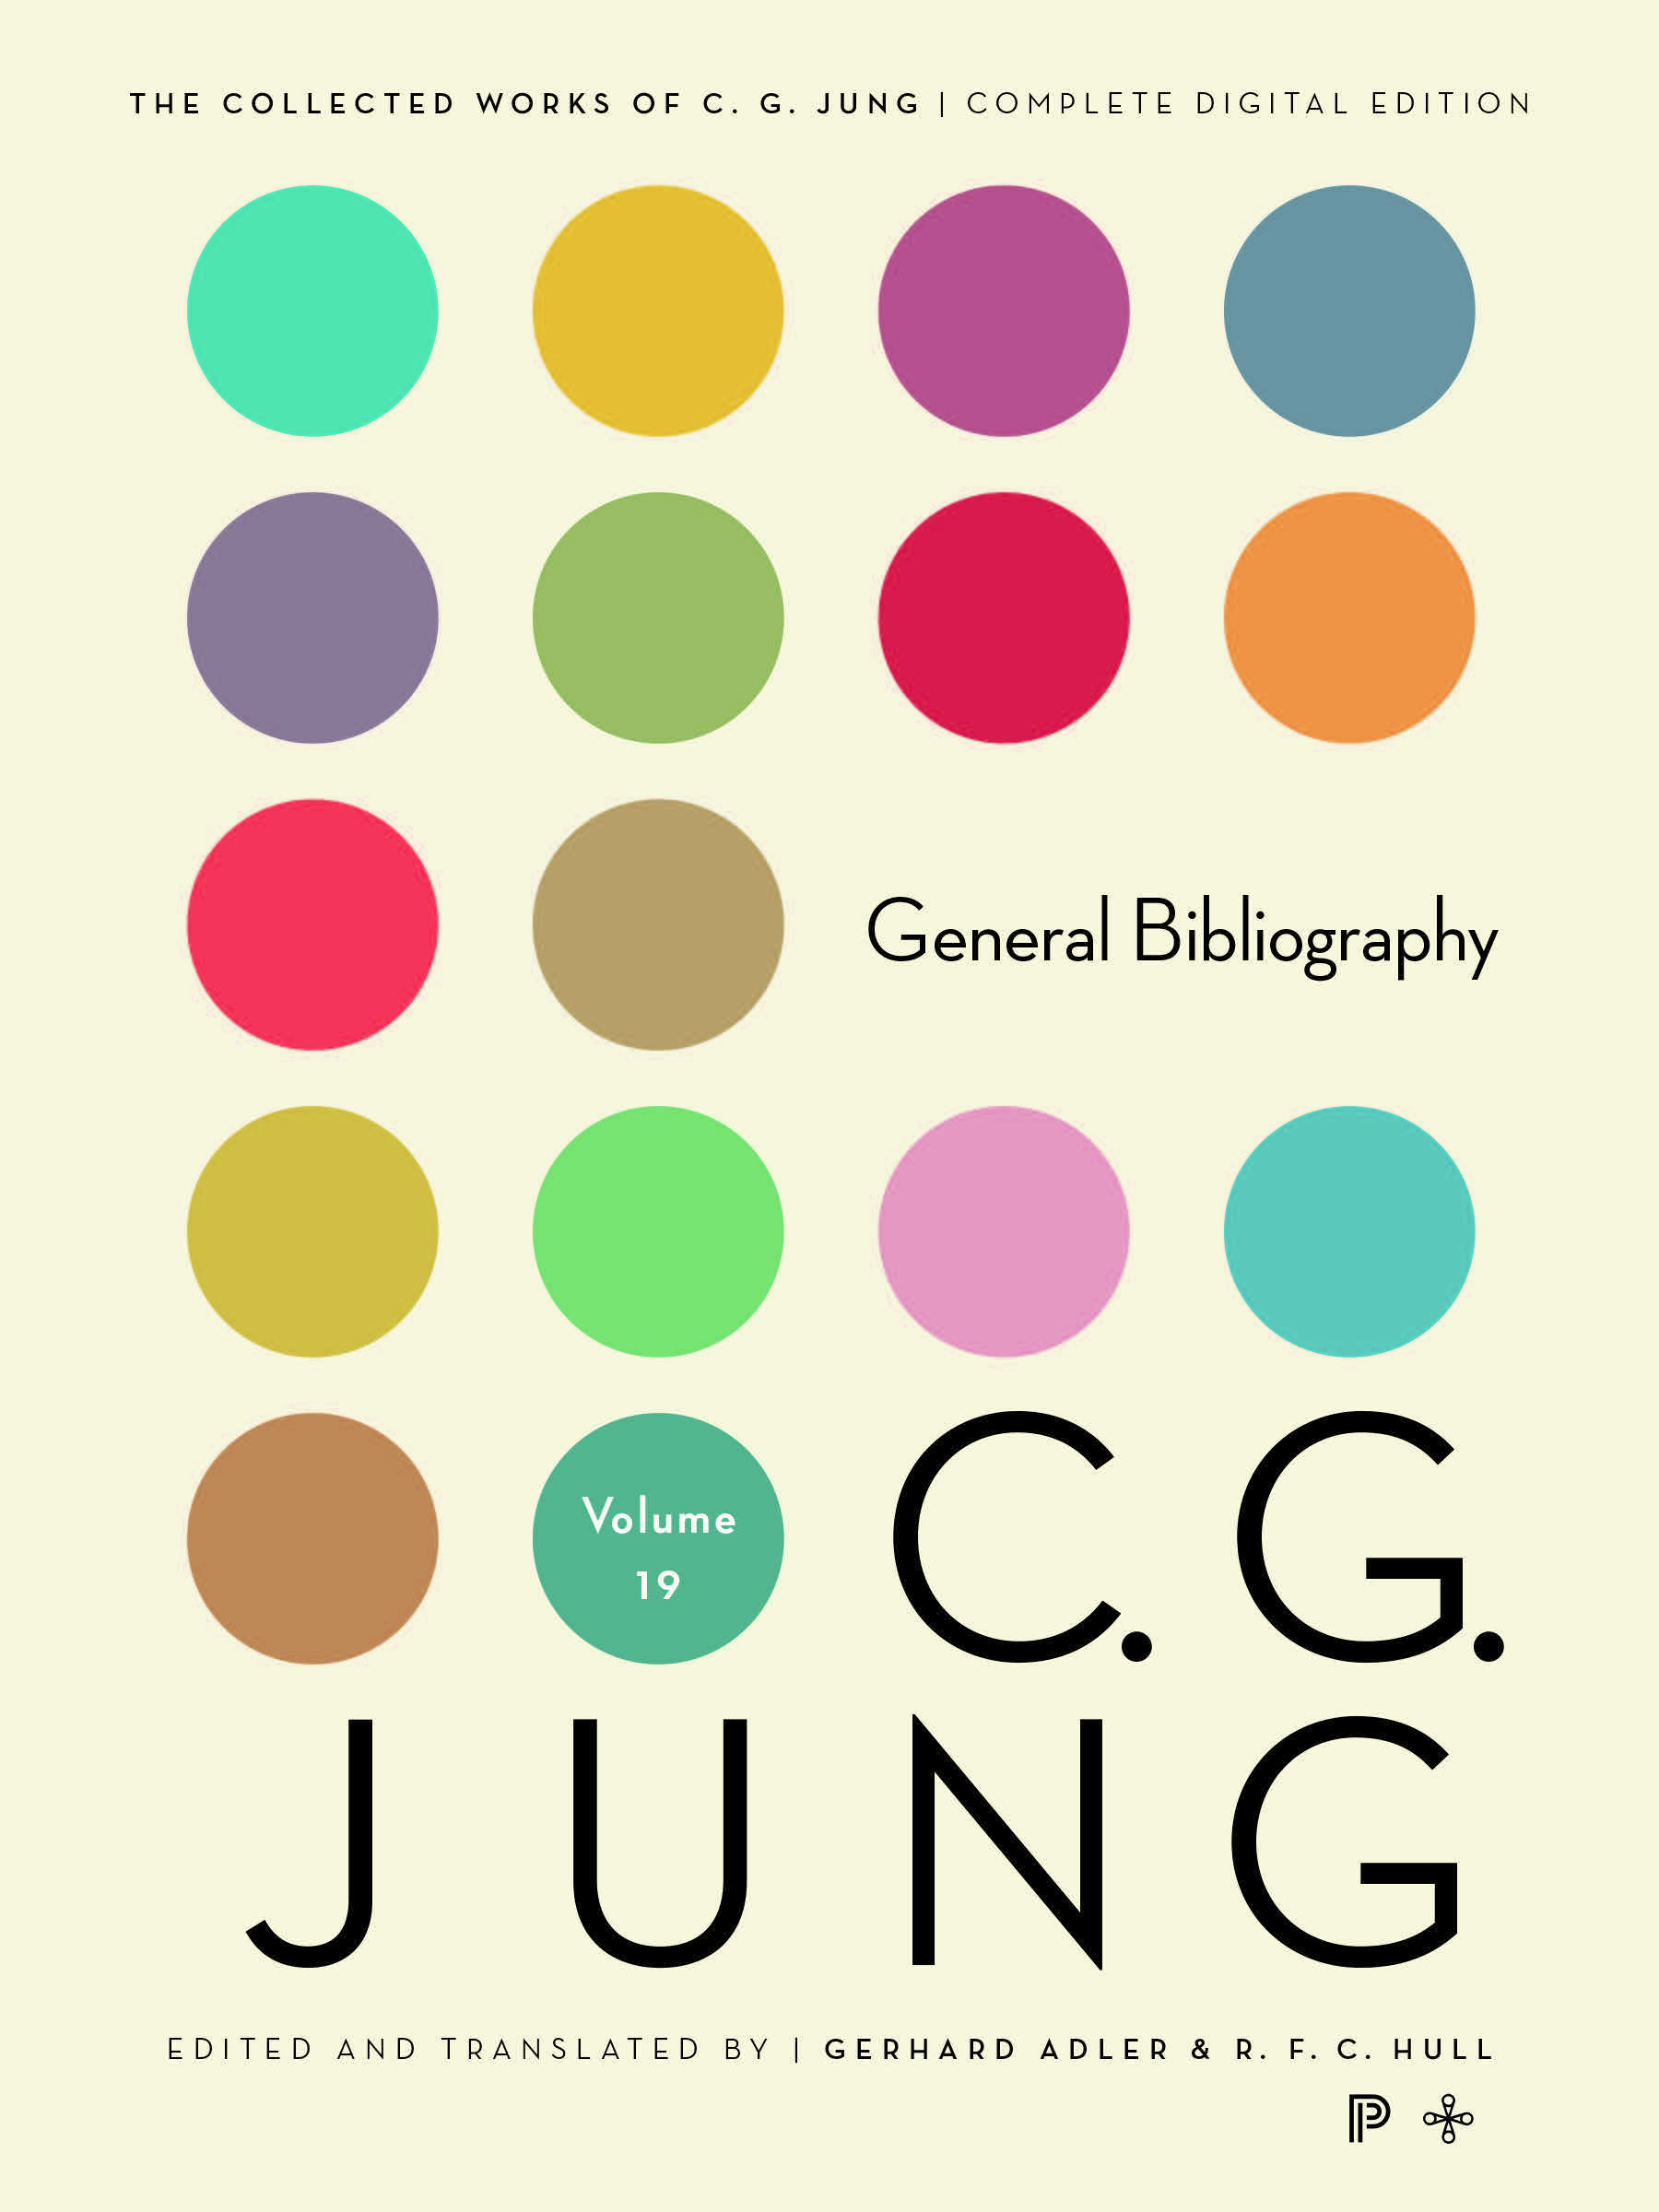 Collected Works of C.G. Jung, Volume 19 : General Bibliography